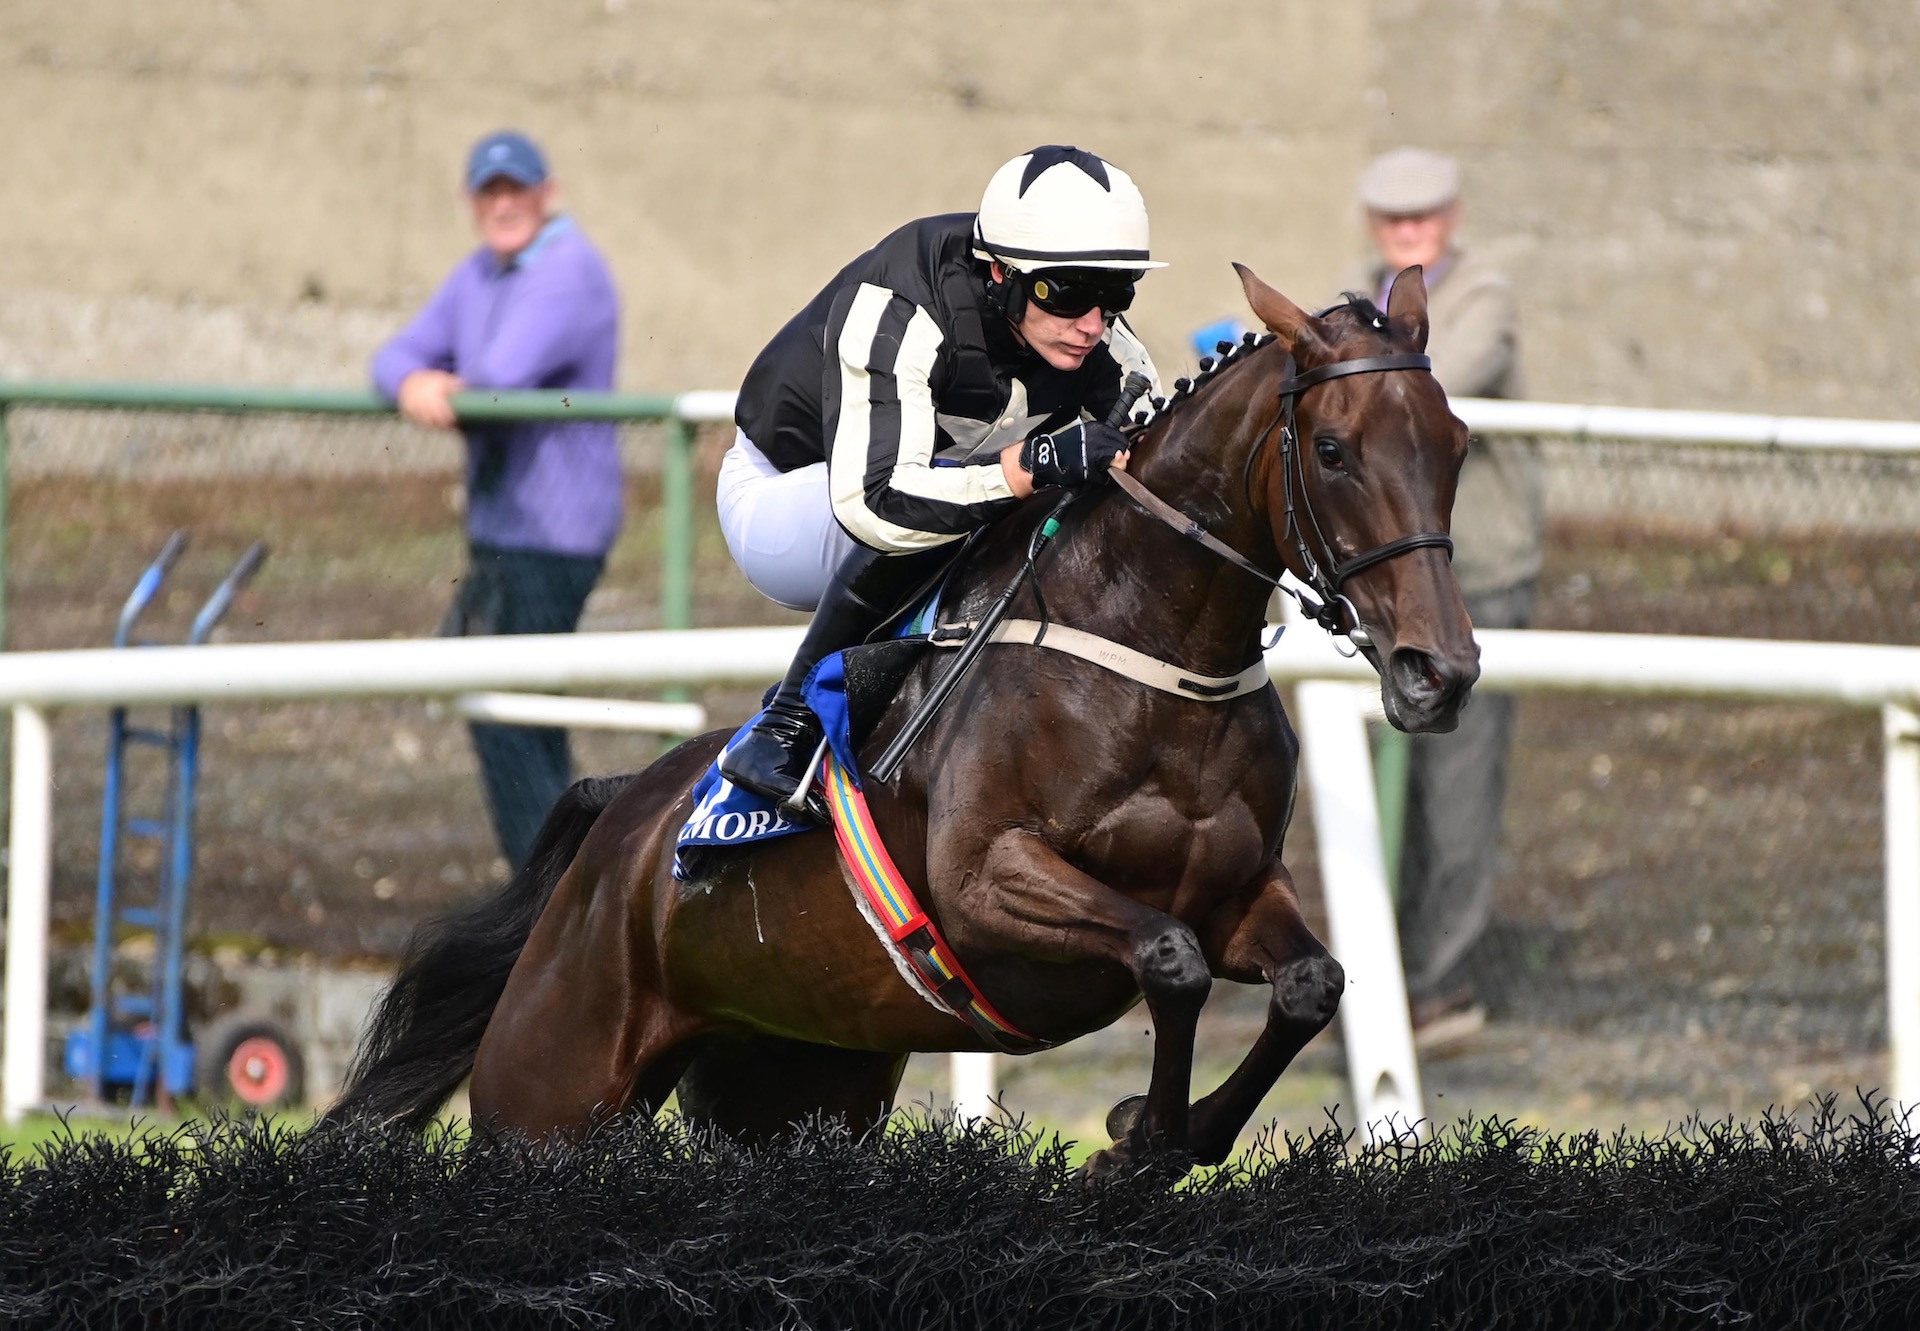 Friends (Mahler) Wins The Maiden Hurdle At Tramore